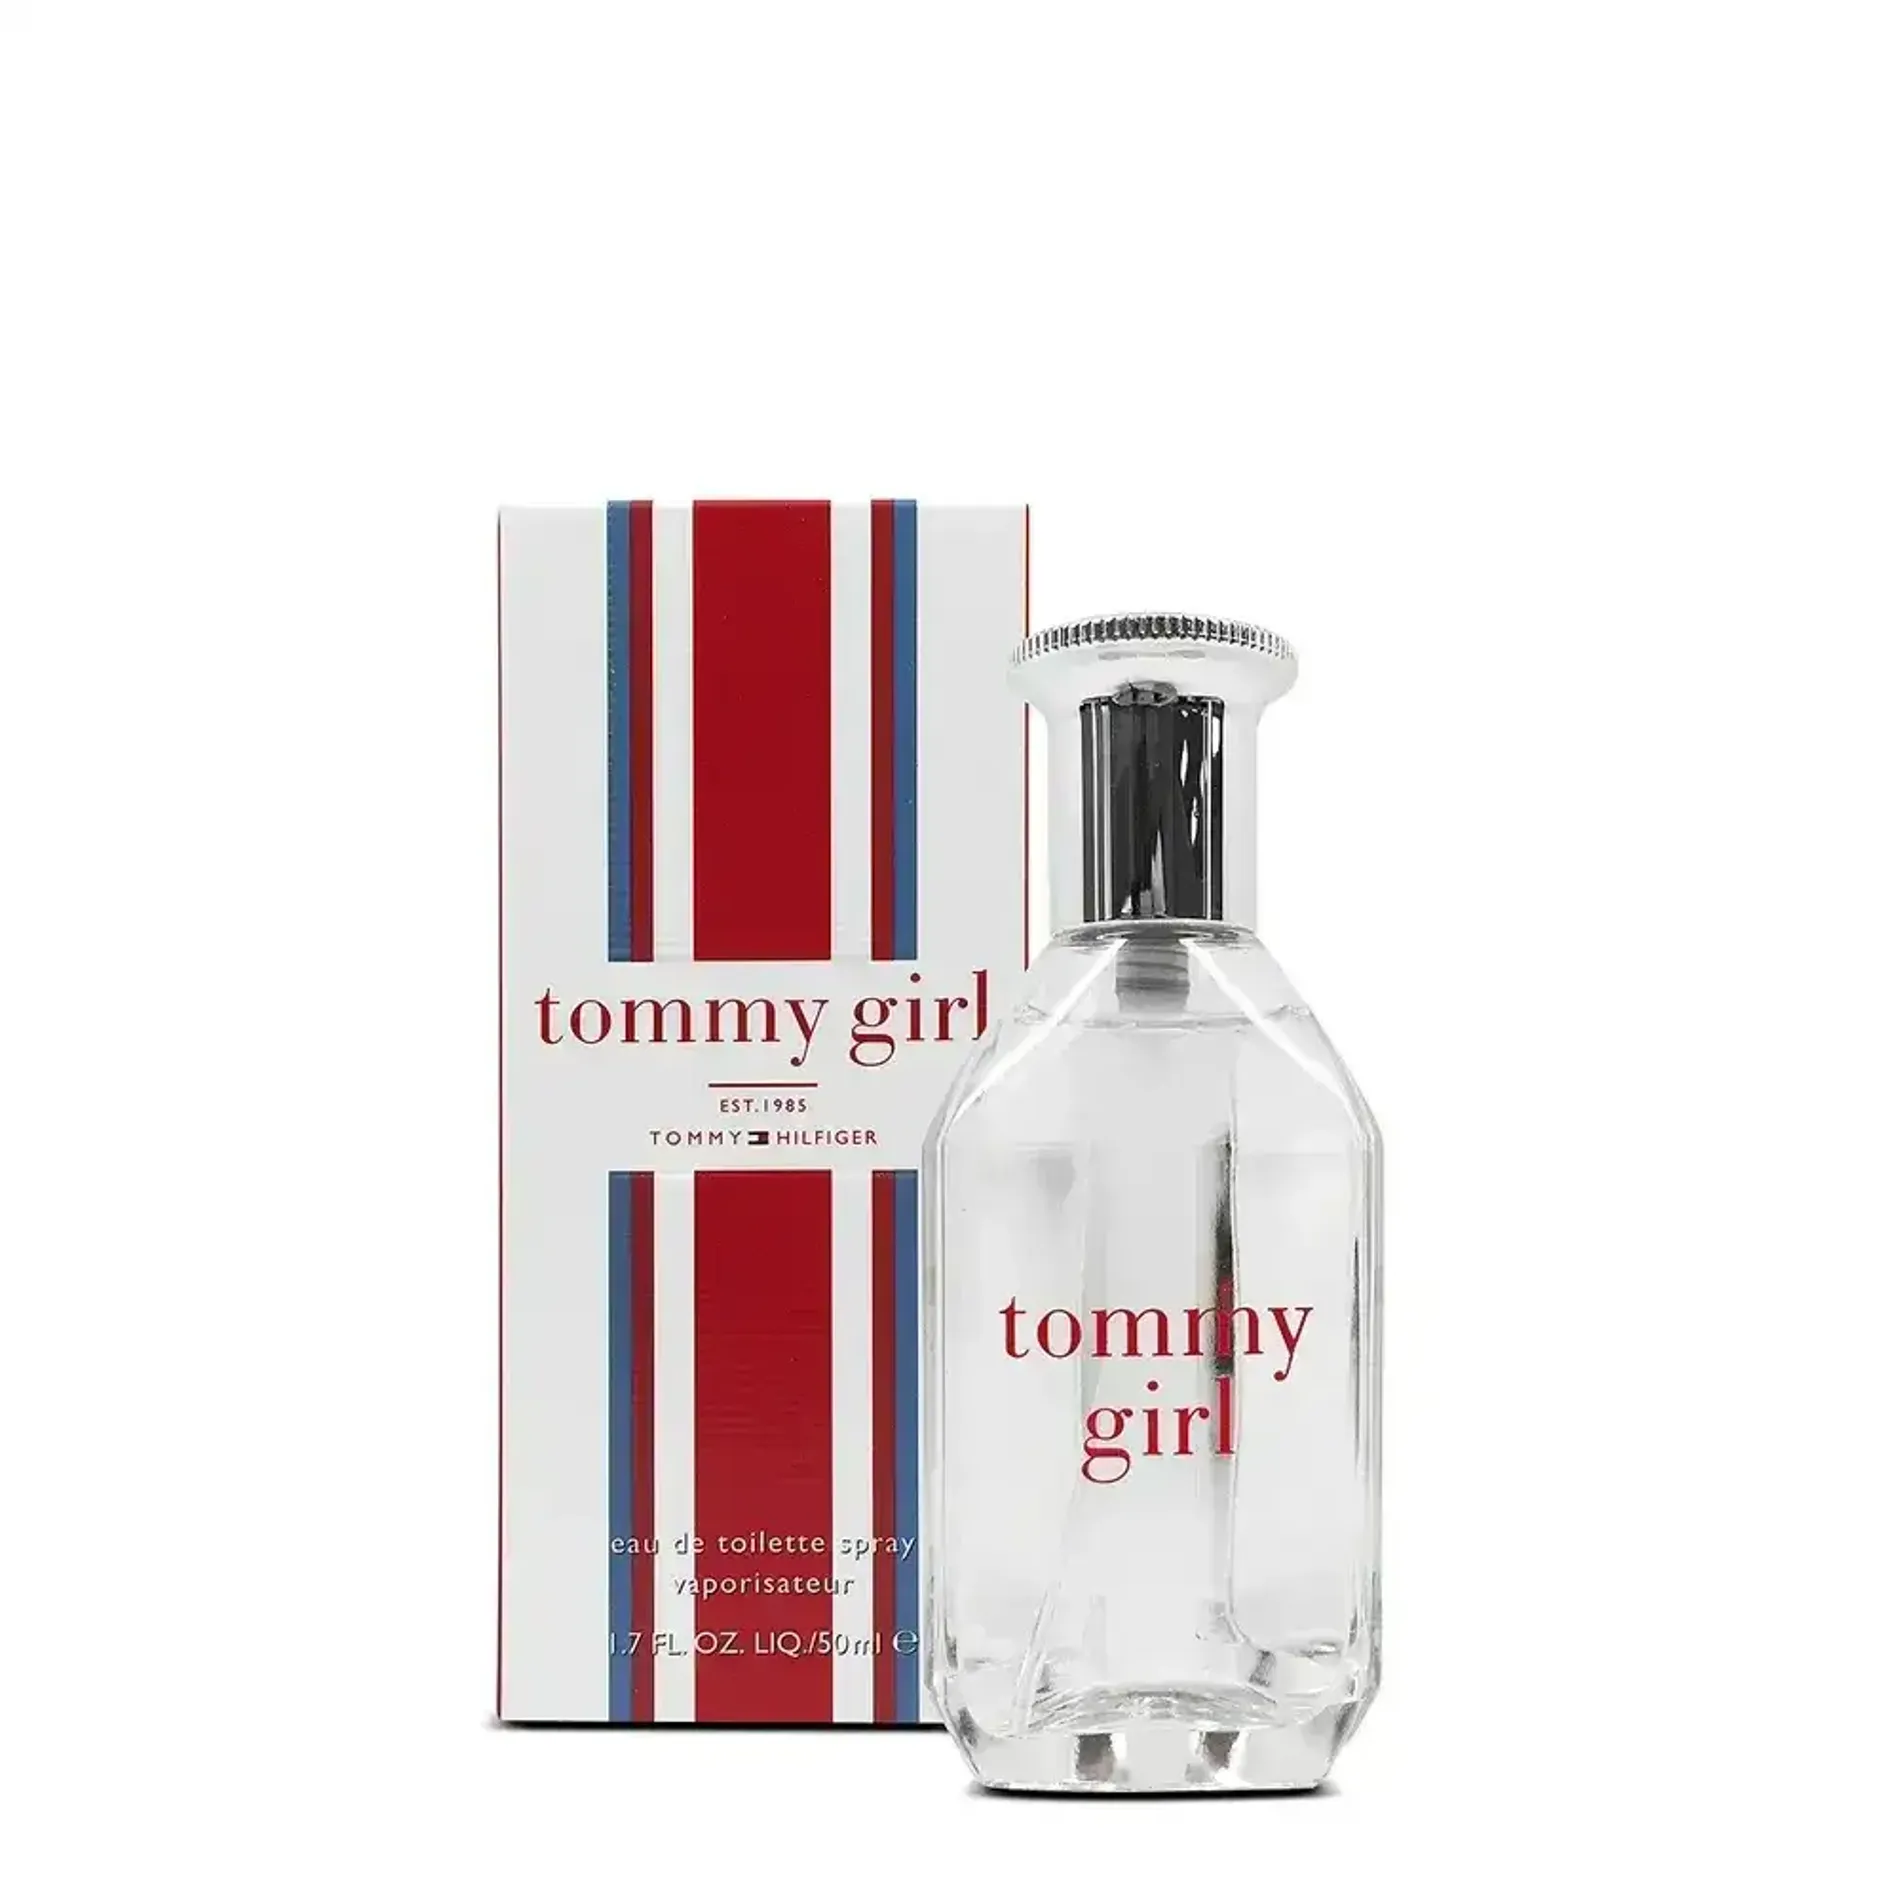 nuoc-hoa-danh-cho-nu-tommy-girl-cologne-spray-edt-50ml-100ml-5